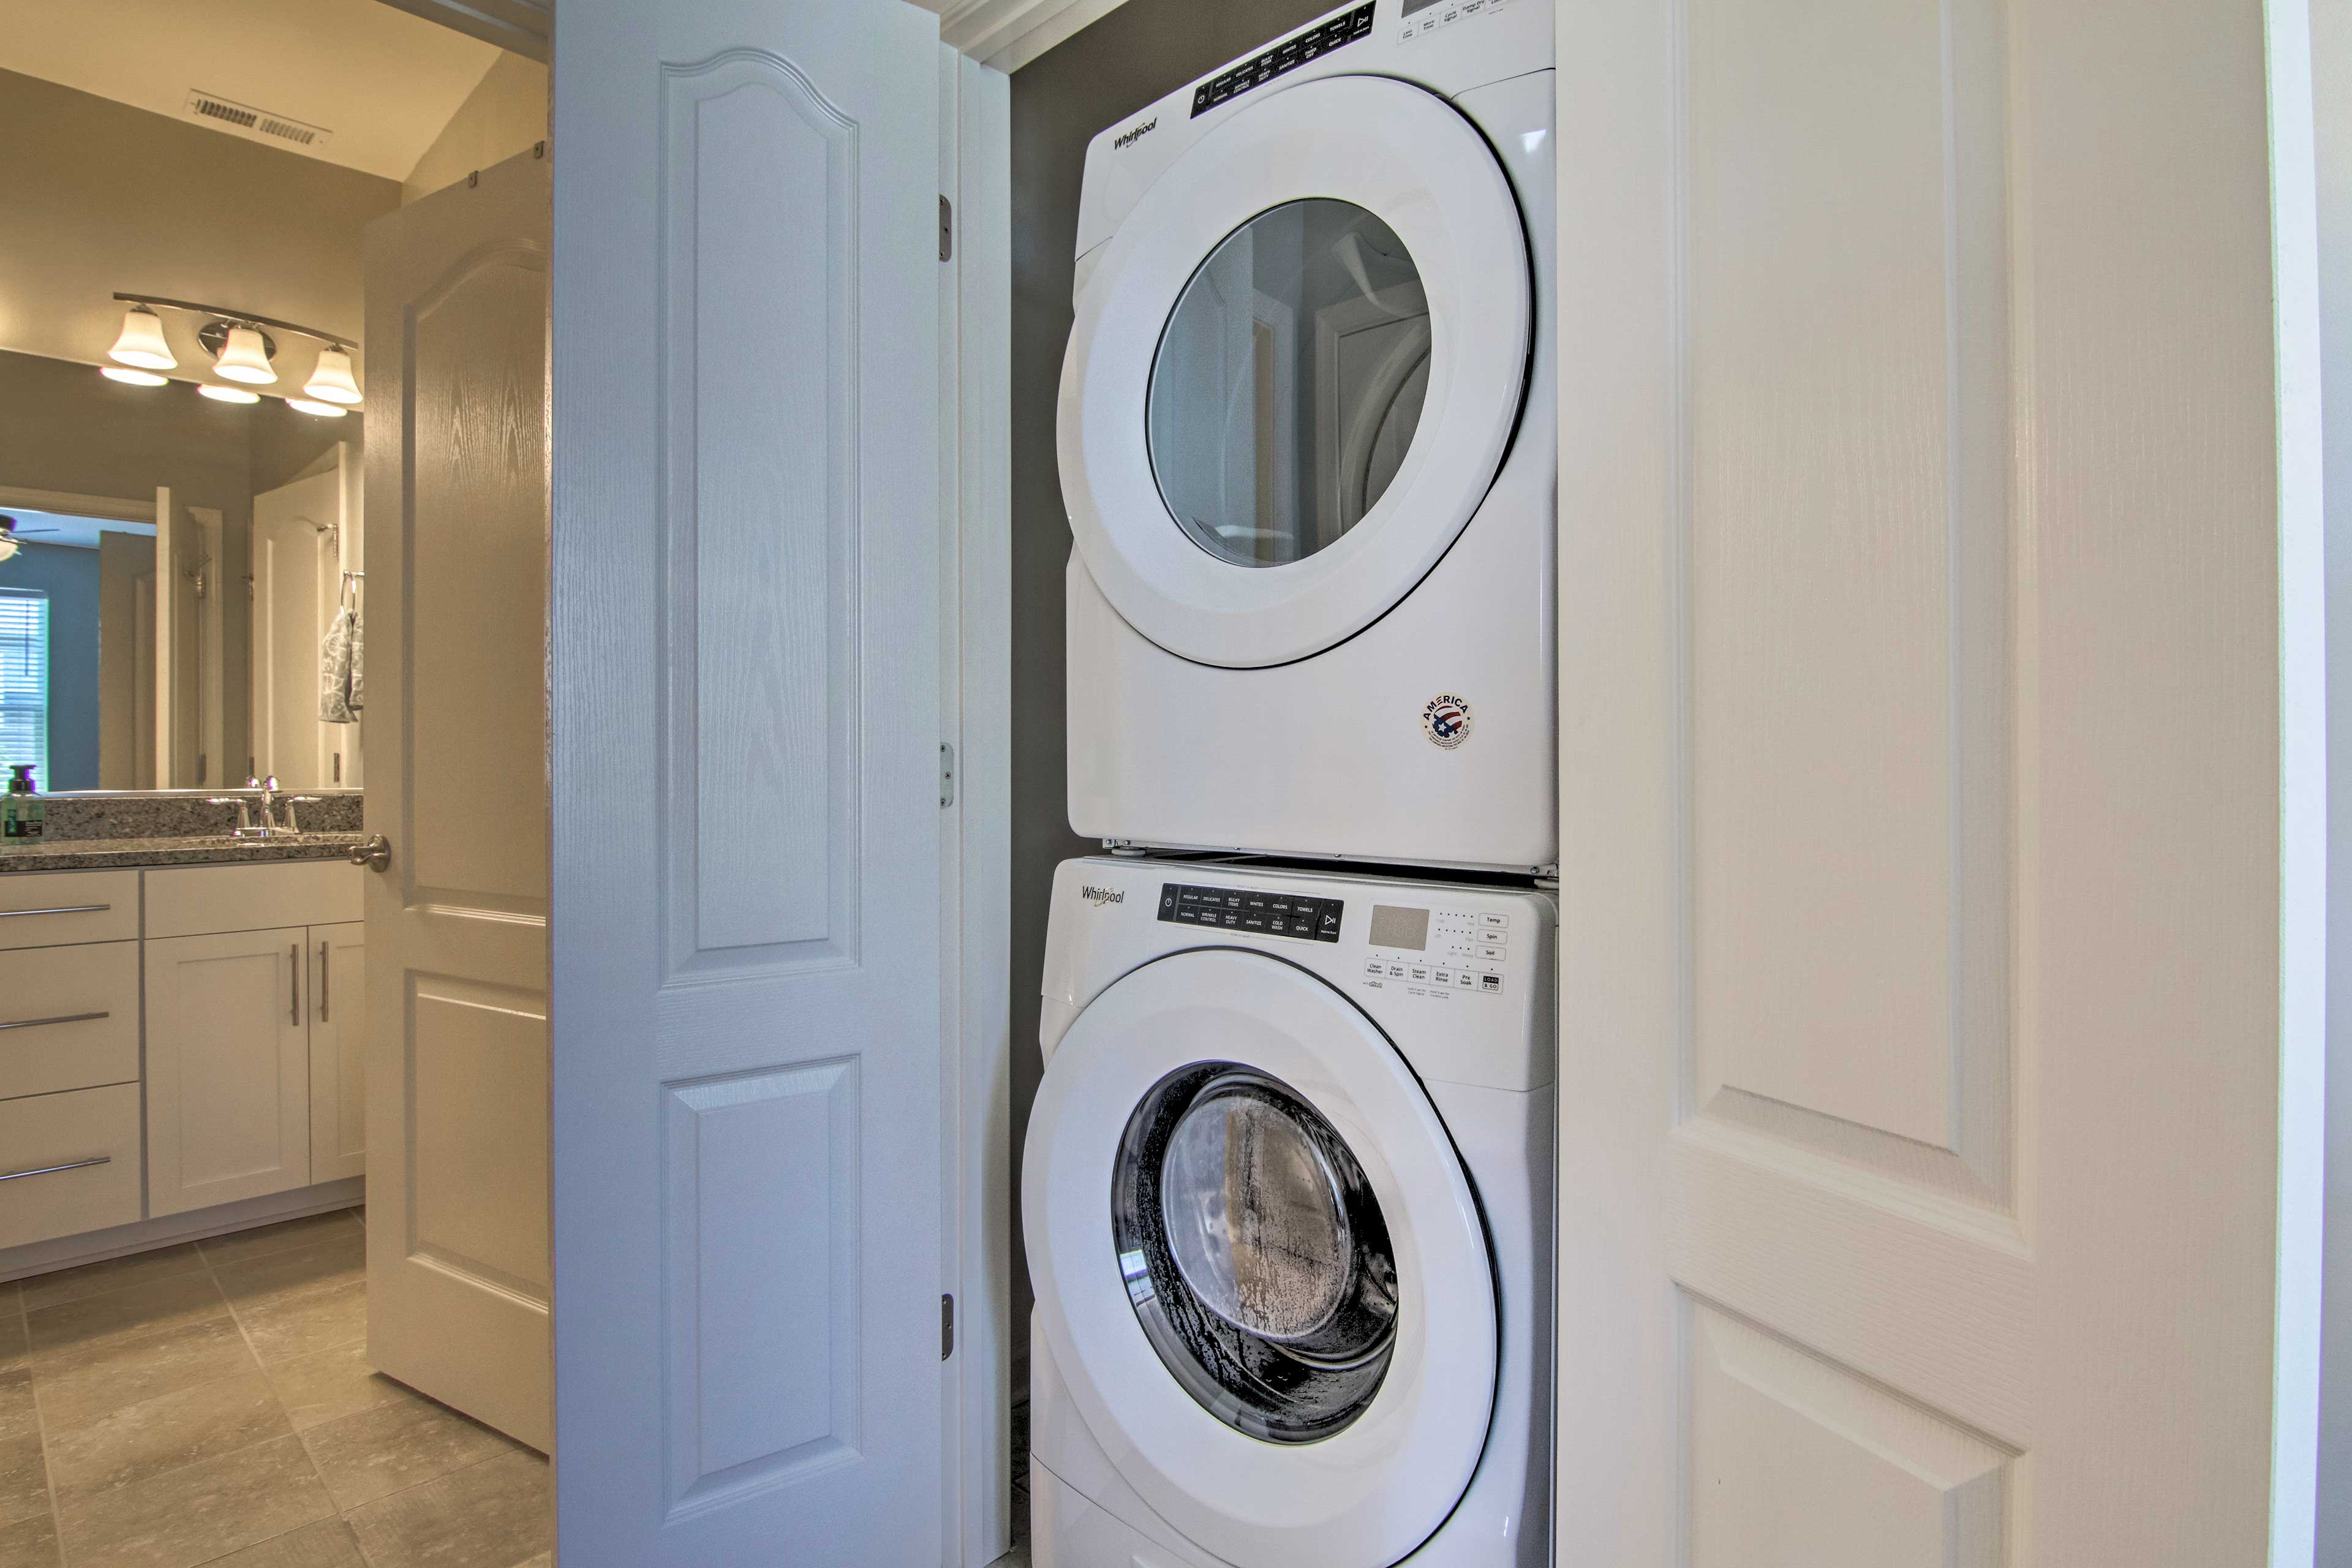 Keep your beach gear fresh with the in-unit laundry machines.